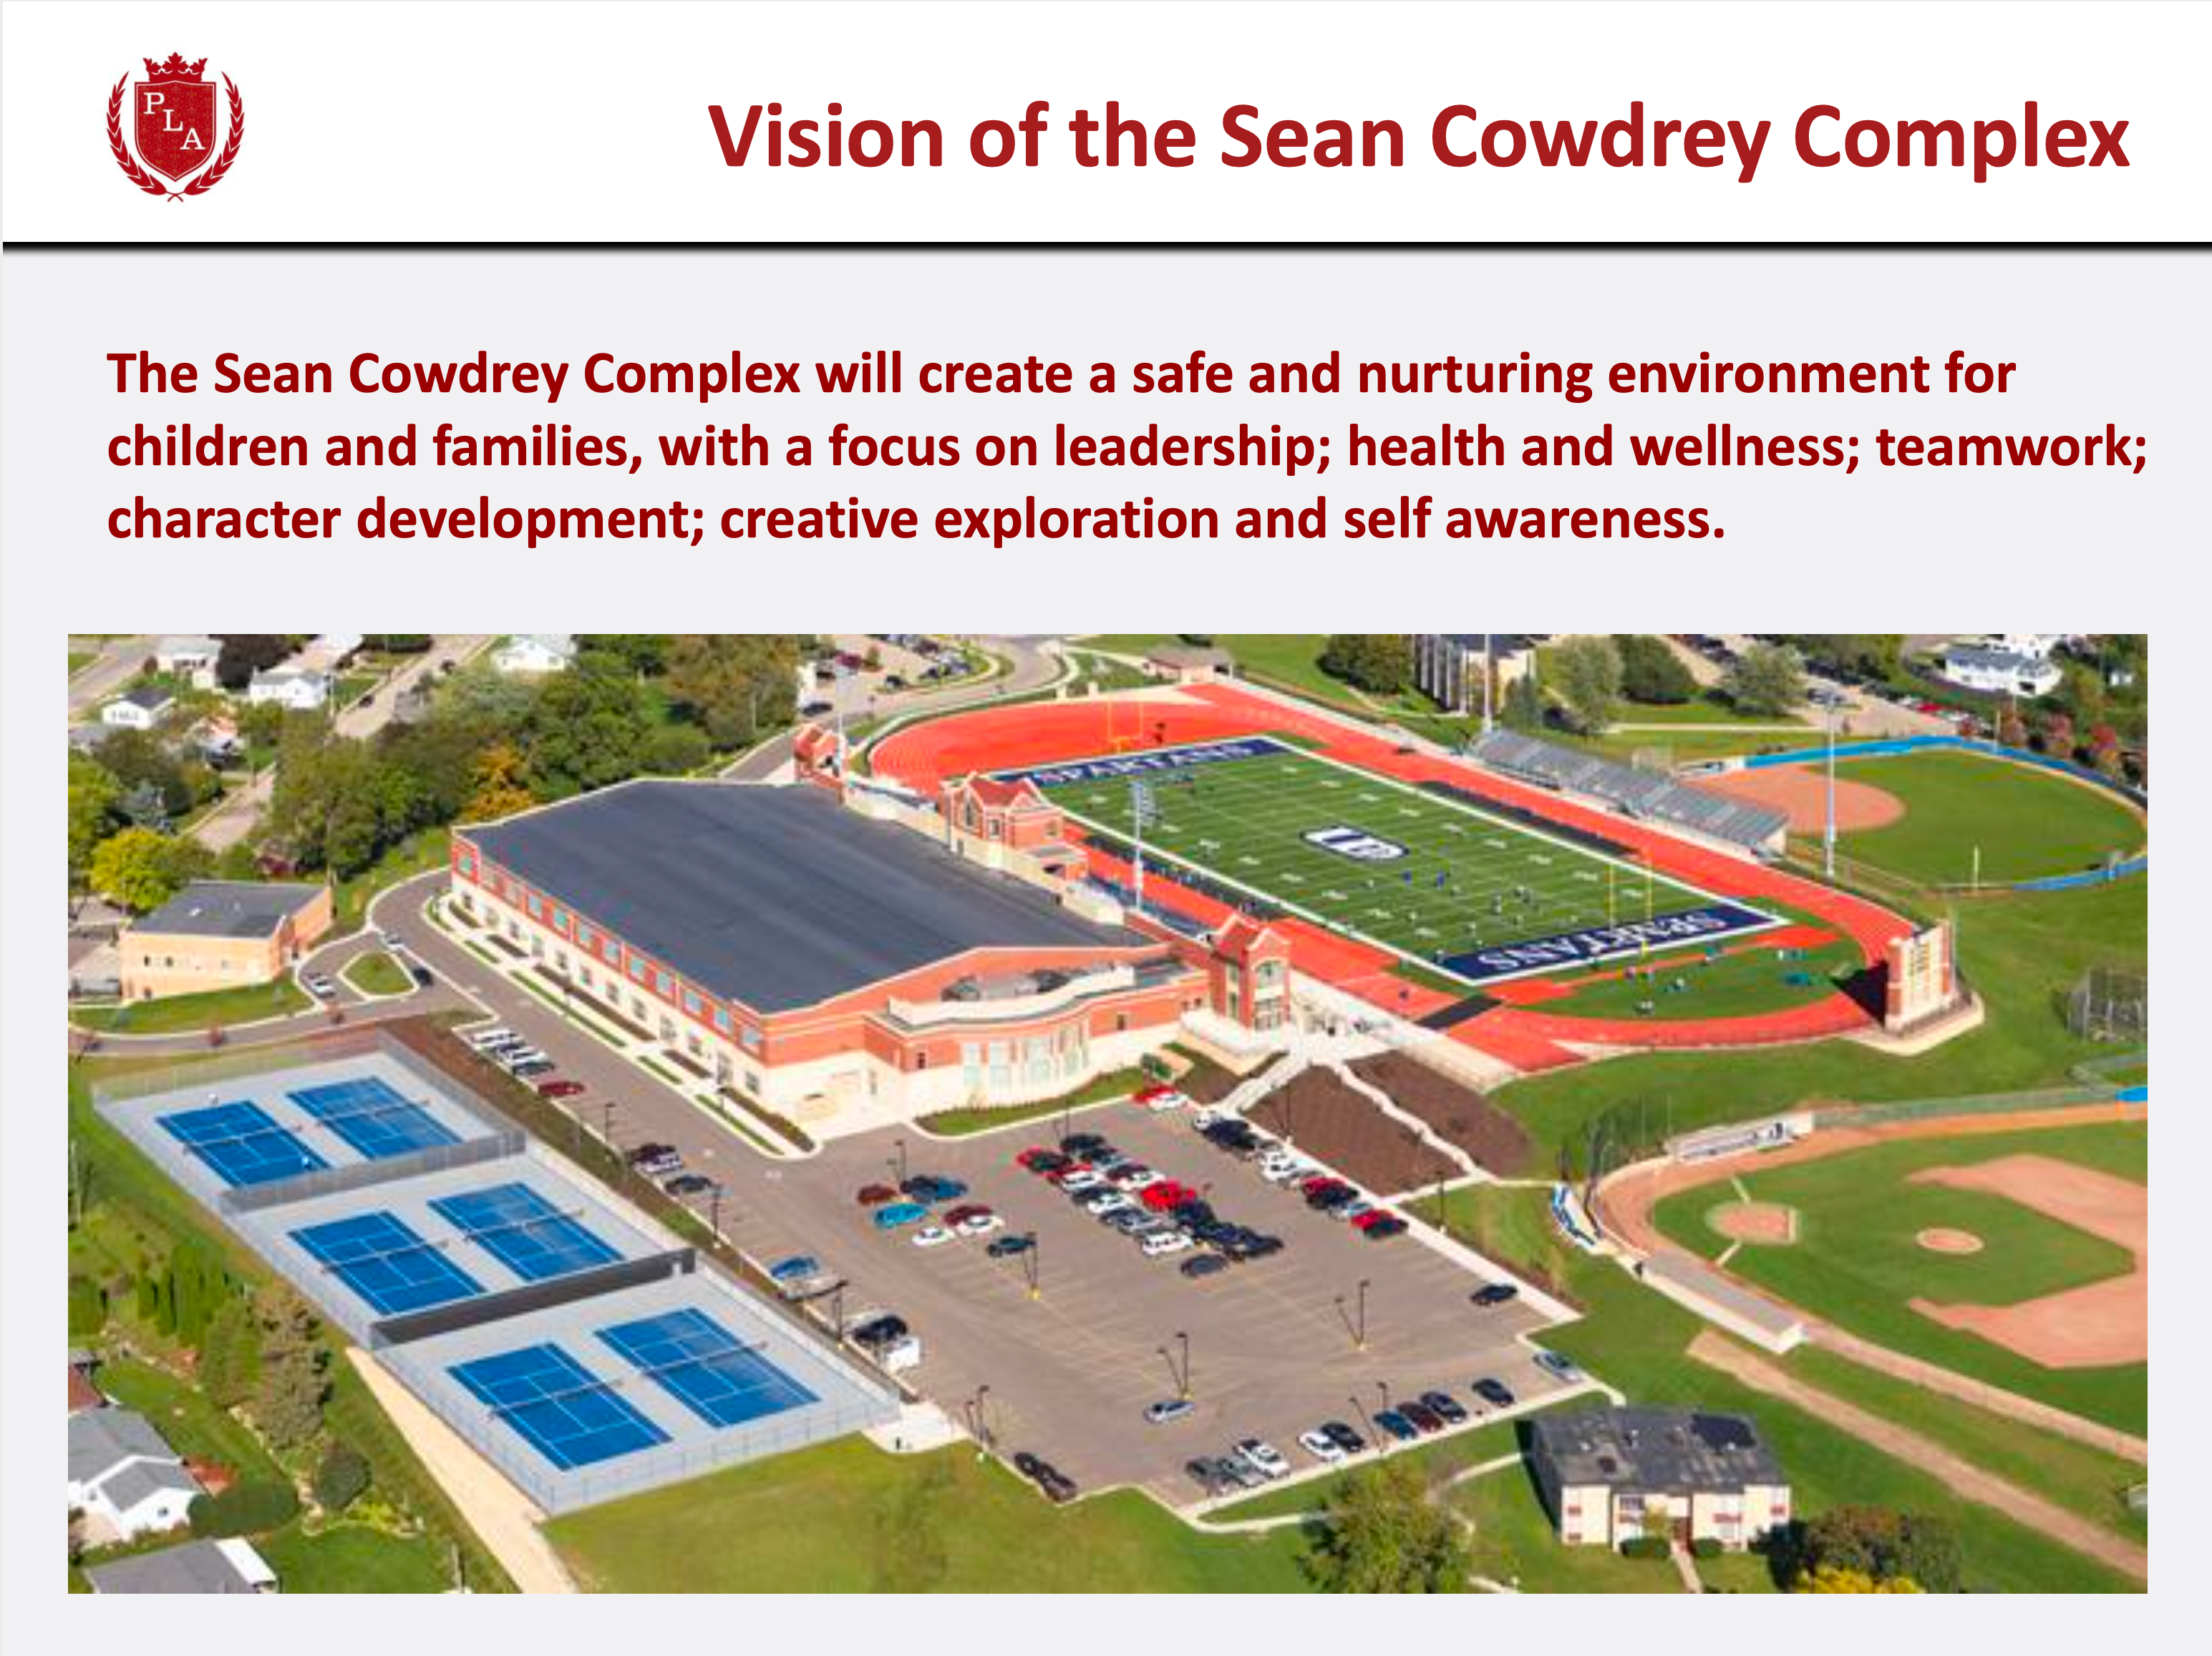 The vision of the Sean Cowdrey Complex near James and Rosemary Phalen Leadership Academy.   The Sean Cowdrey Complex will create a safe and nurturing environment for children and families, with a focus on leadership; health and wellness; teamwork; character development; creative exploration and self awareness. The complex will be located on 15 acres of land, which includes a 72,000 square foot building. 